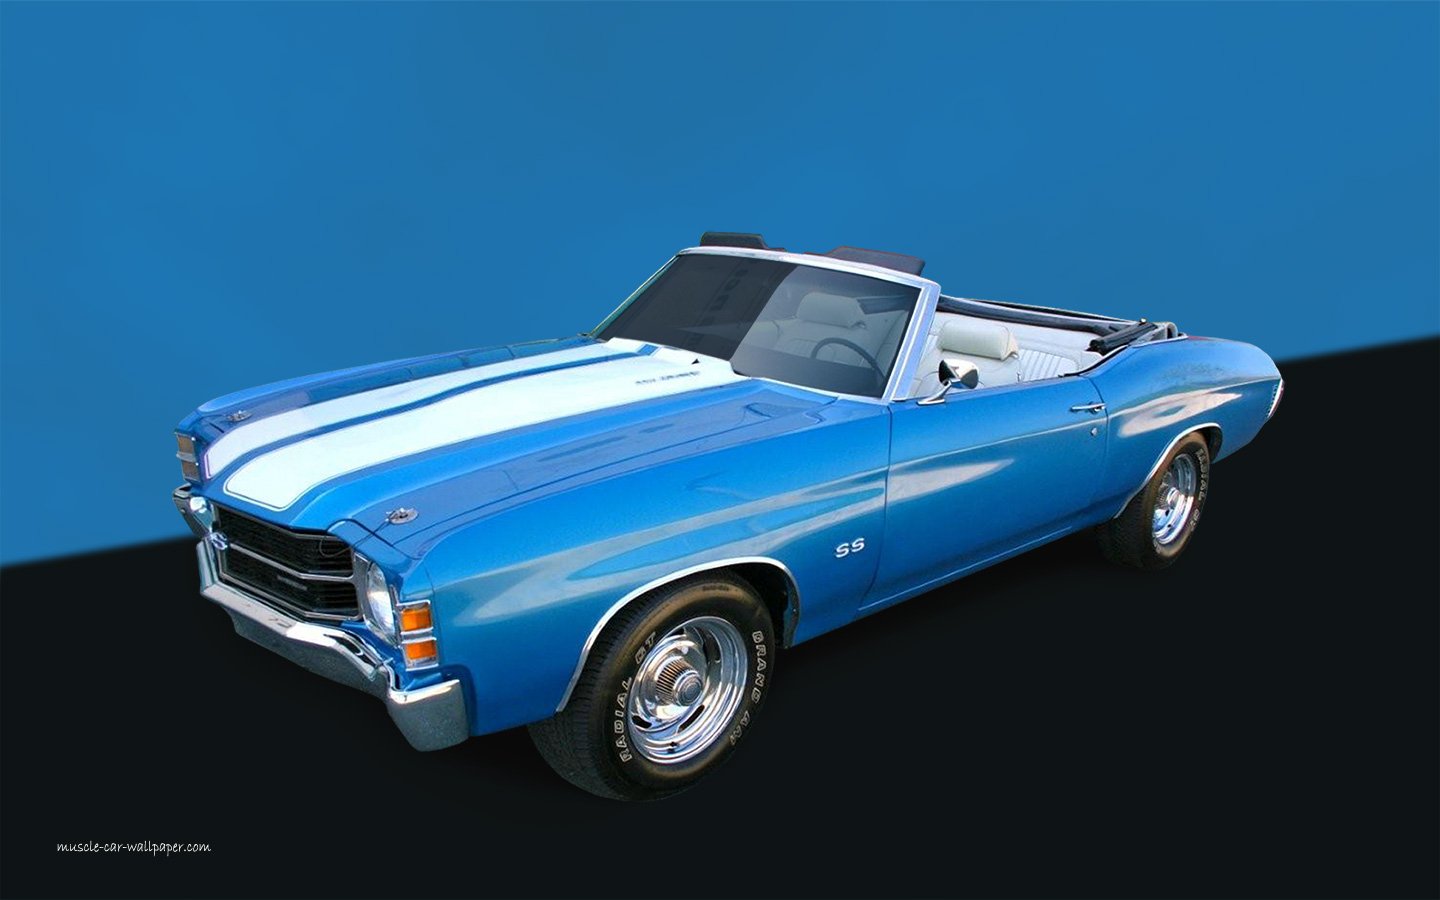 chevelle ss wallpaper 1971 convertible left front view chevelle muscle